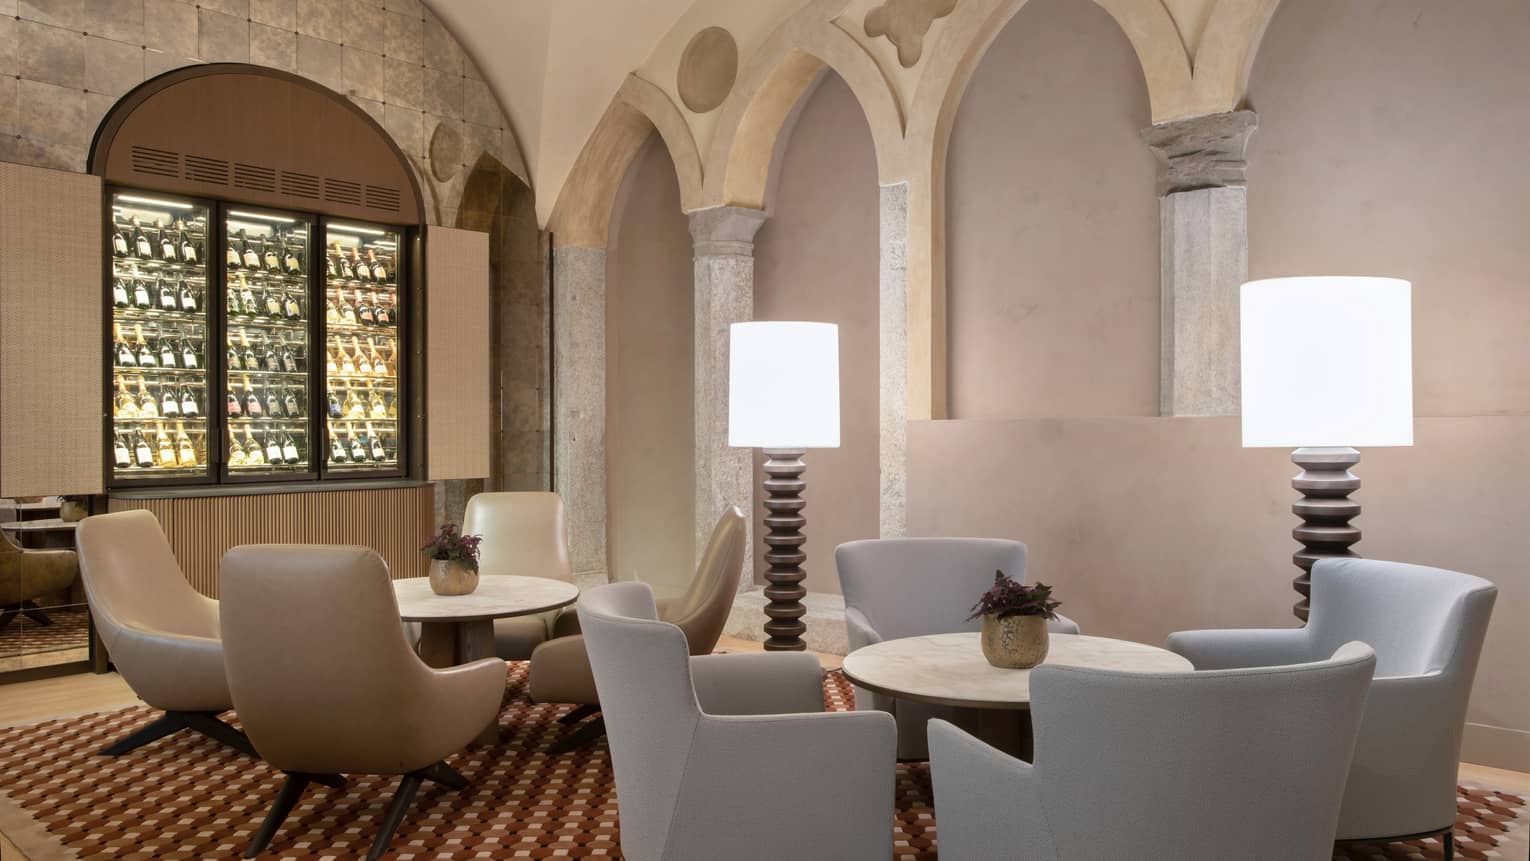 Camino lobby bar with neutral modern round tables and chairs, two floor lamps, arches in backdrop